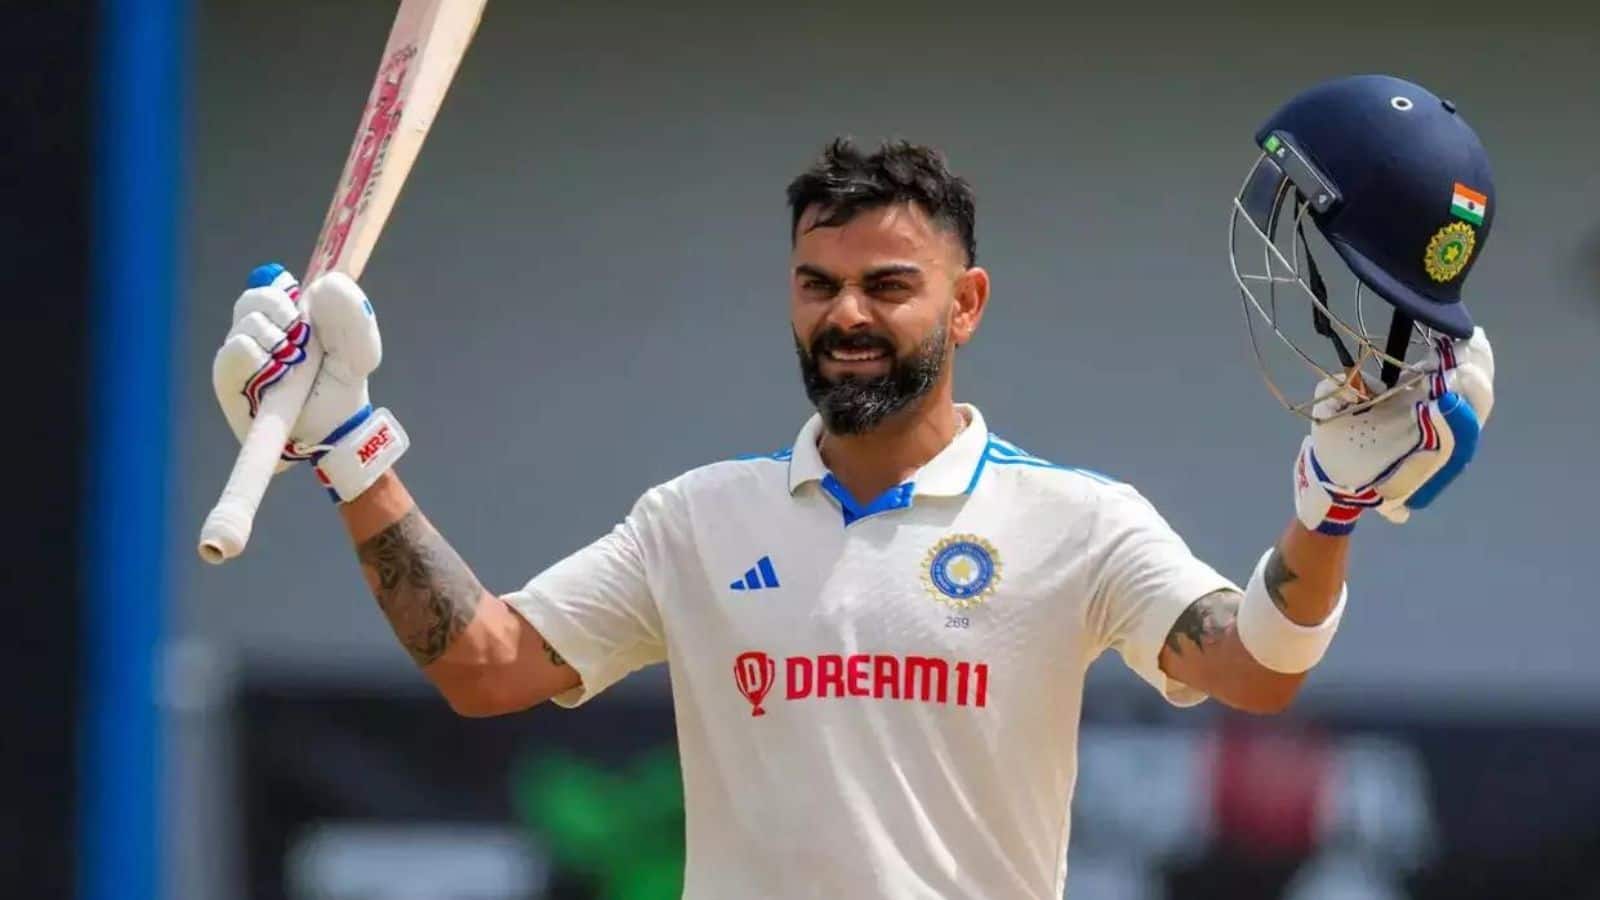 'I'm A Traditionalist' - Virat Kohli Comes Out As Test Cricket's Greatest Advocator